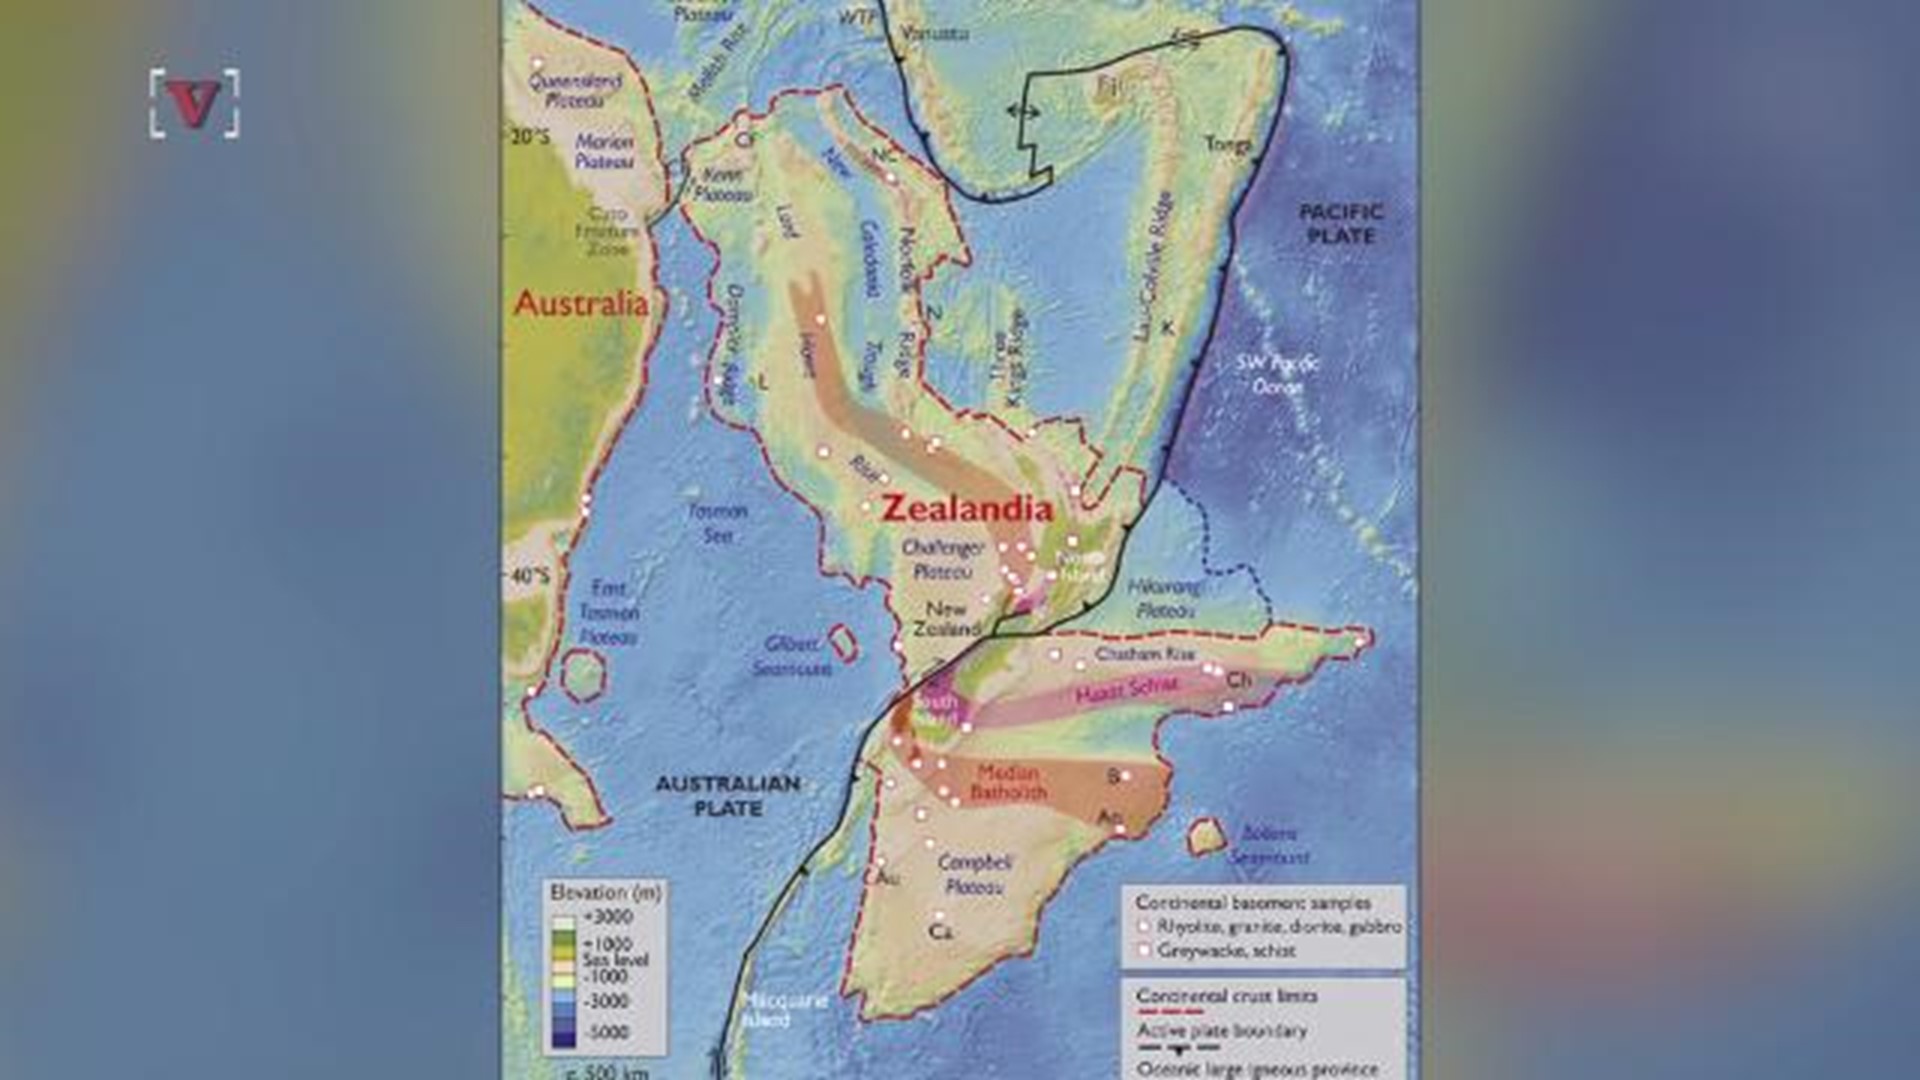 Scientists are just now discovering some of the hidden secrets of the 'lost continent' of Zealandia. Veuer's Josh King has the story (@abridgetoland).